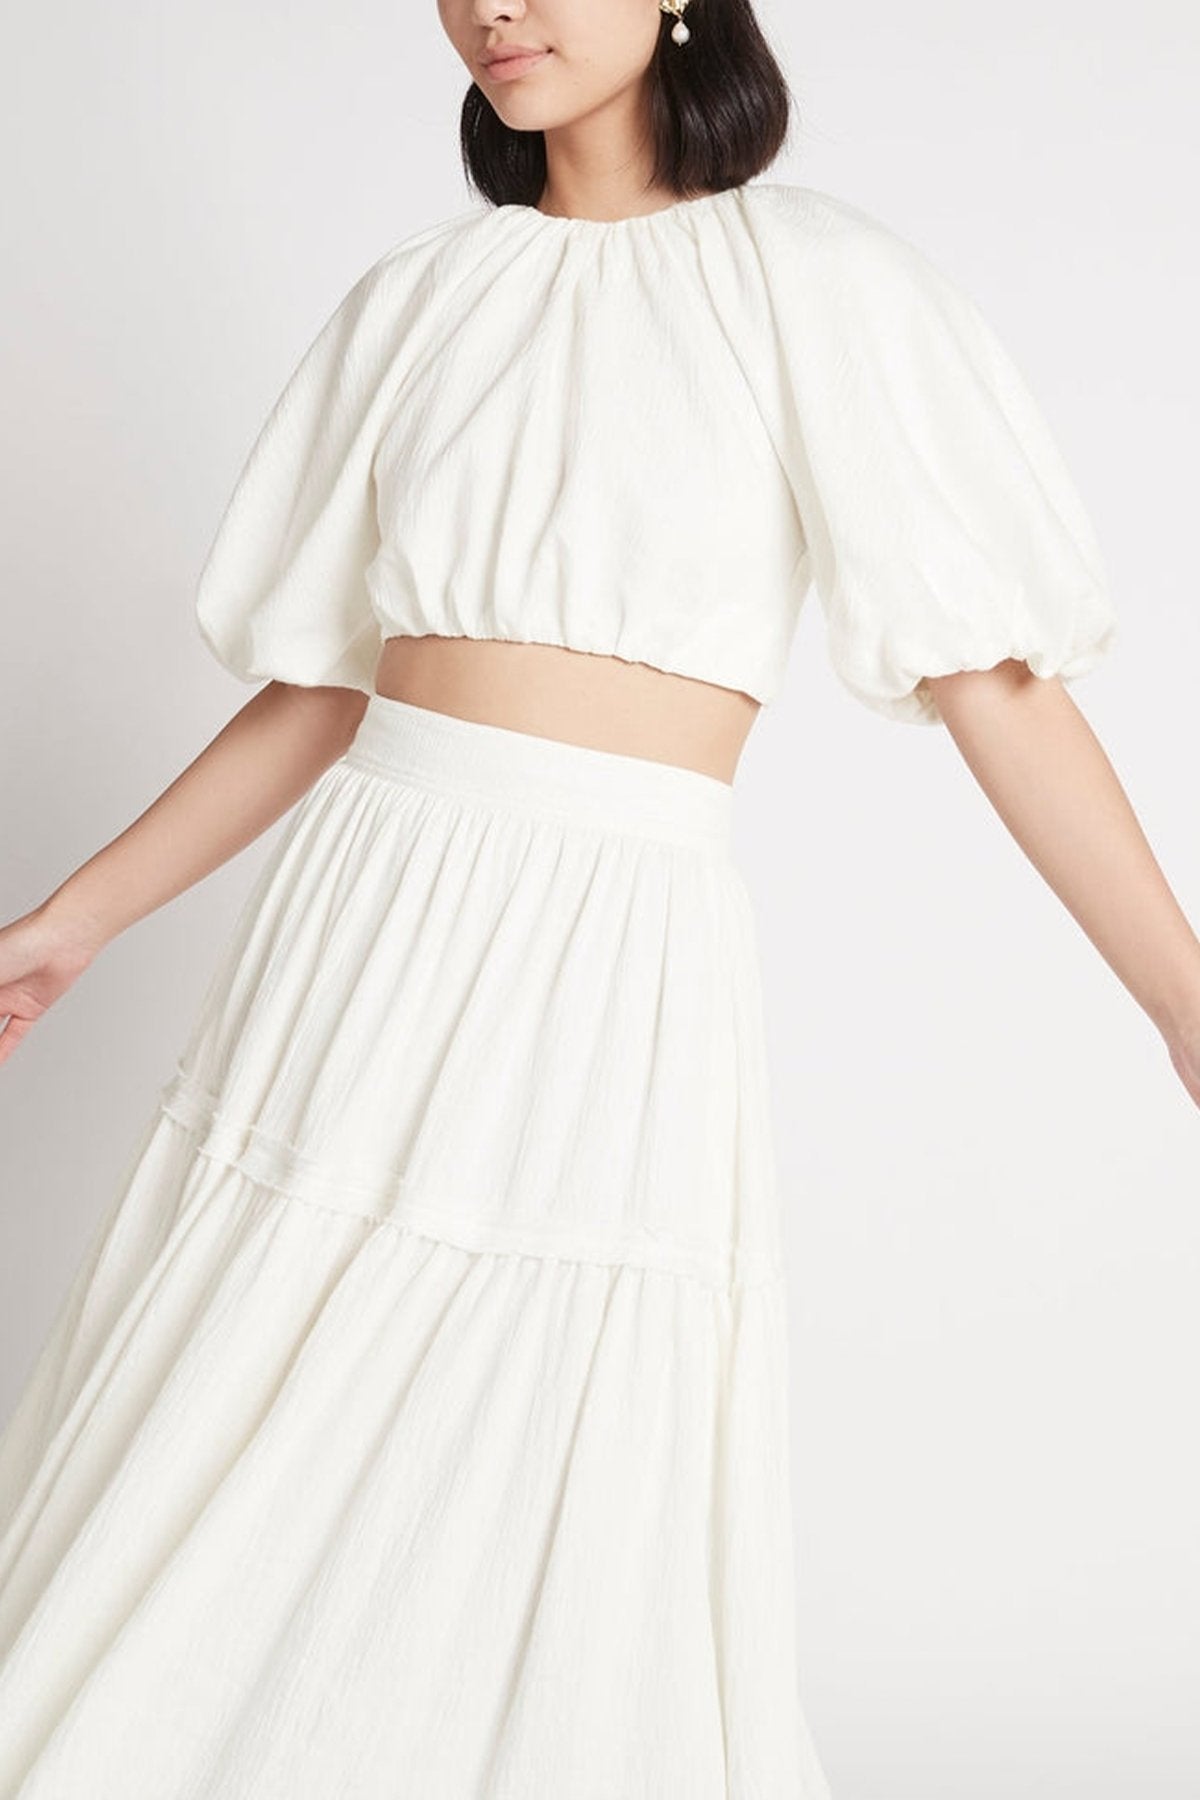 Admiration Lace-Up Cropped Top in Ivory - shop-olivia.com